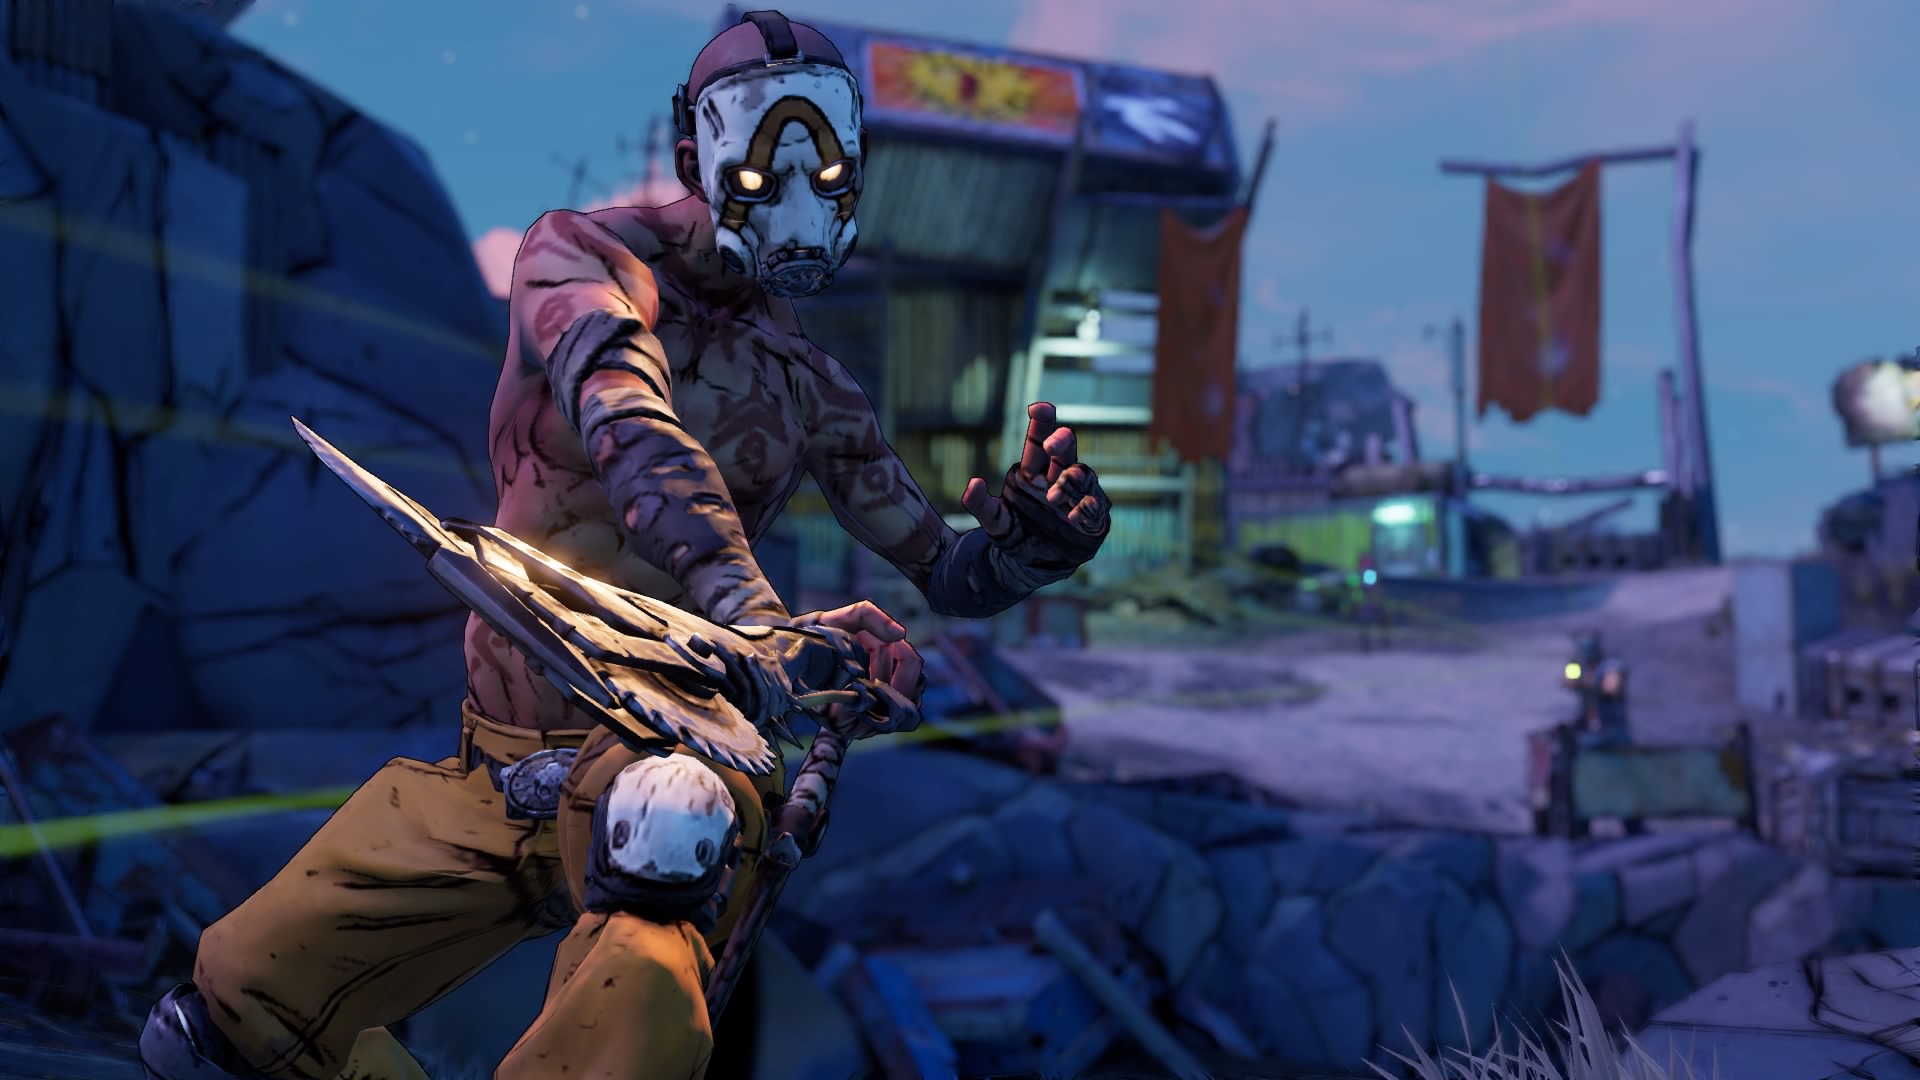 Borderlands Borderlands 3 Gearbox Software Video Games PlayStation PlayStation 4 Xbox Xbox Serie X P 1920x1080